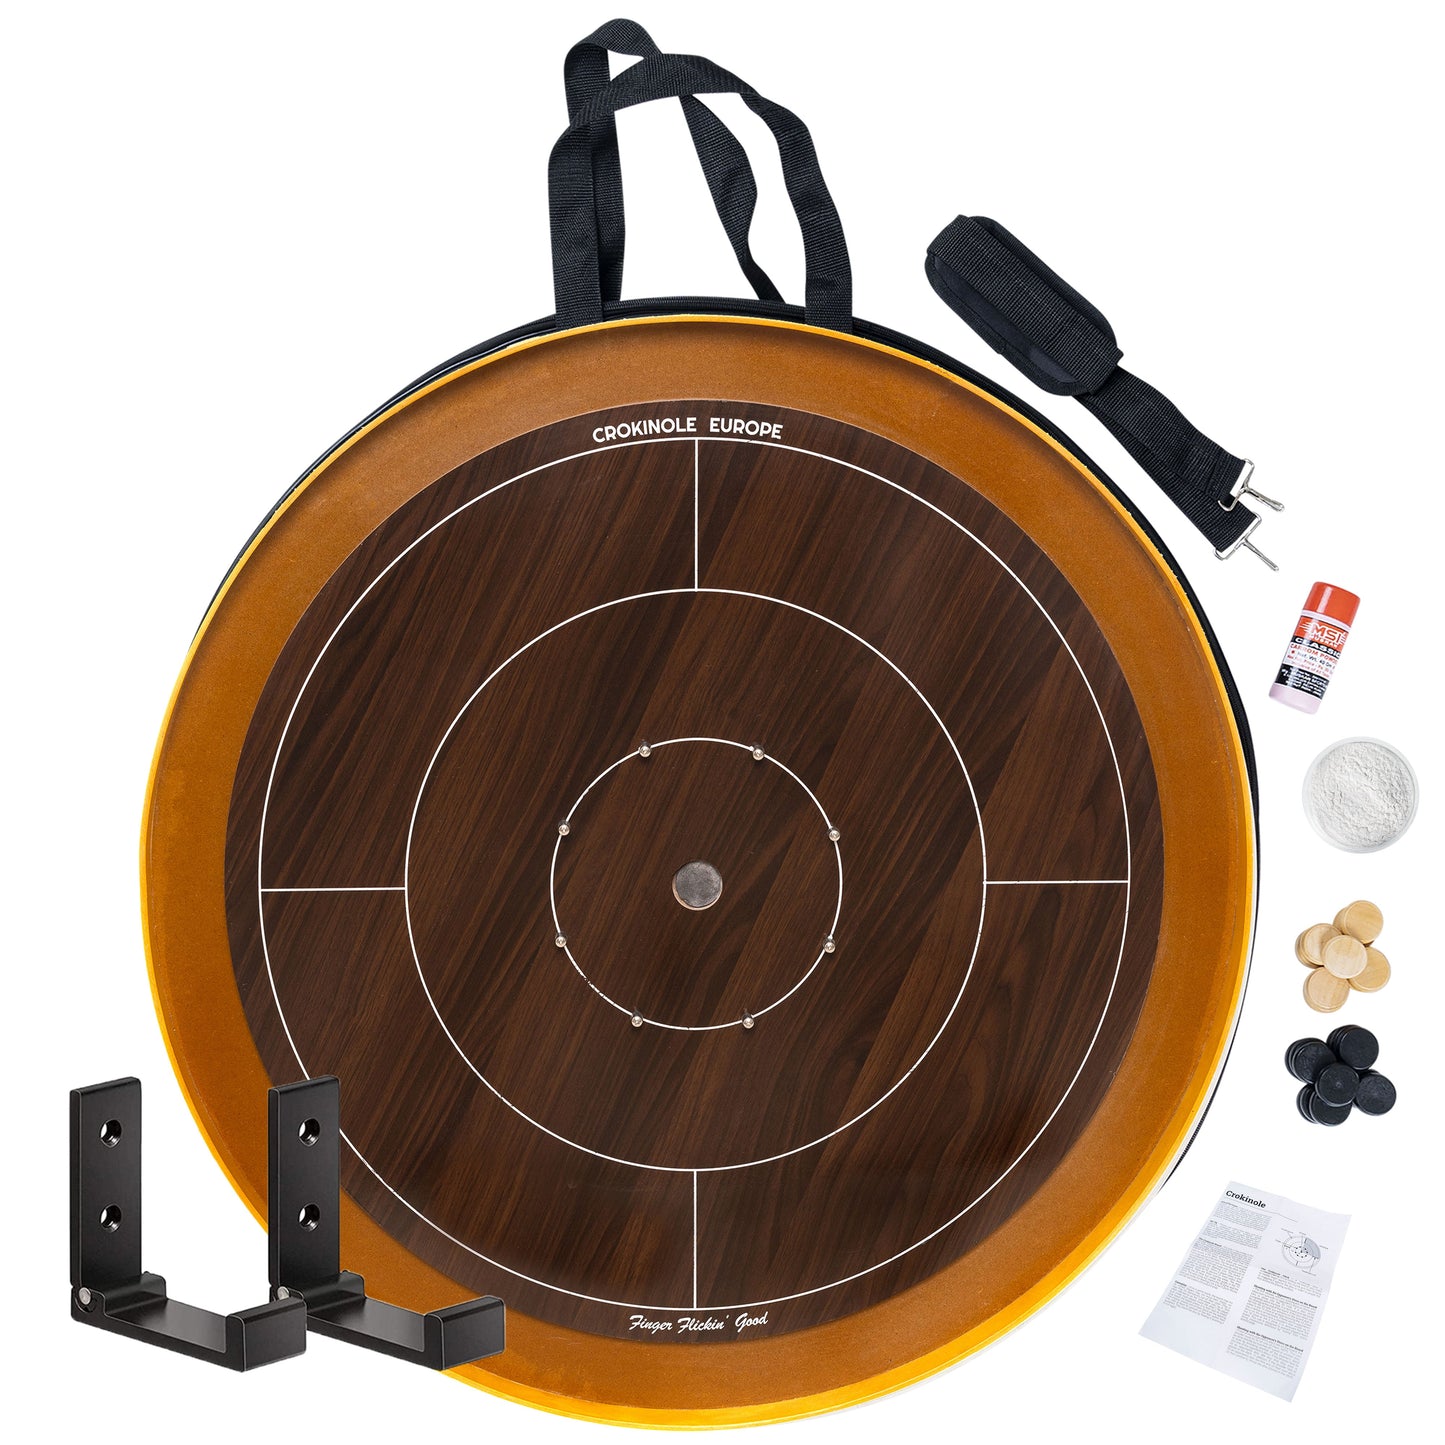 Crokinole Board Game - 'Dark' Tournament Board, Discs, Carrom Powder, Carrying Bag - Official Dimensions - Strategic Game for Young and Old - Buy Crokinole - Crokinole Europe